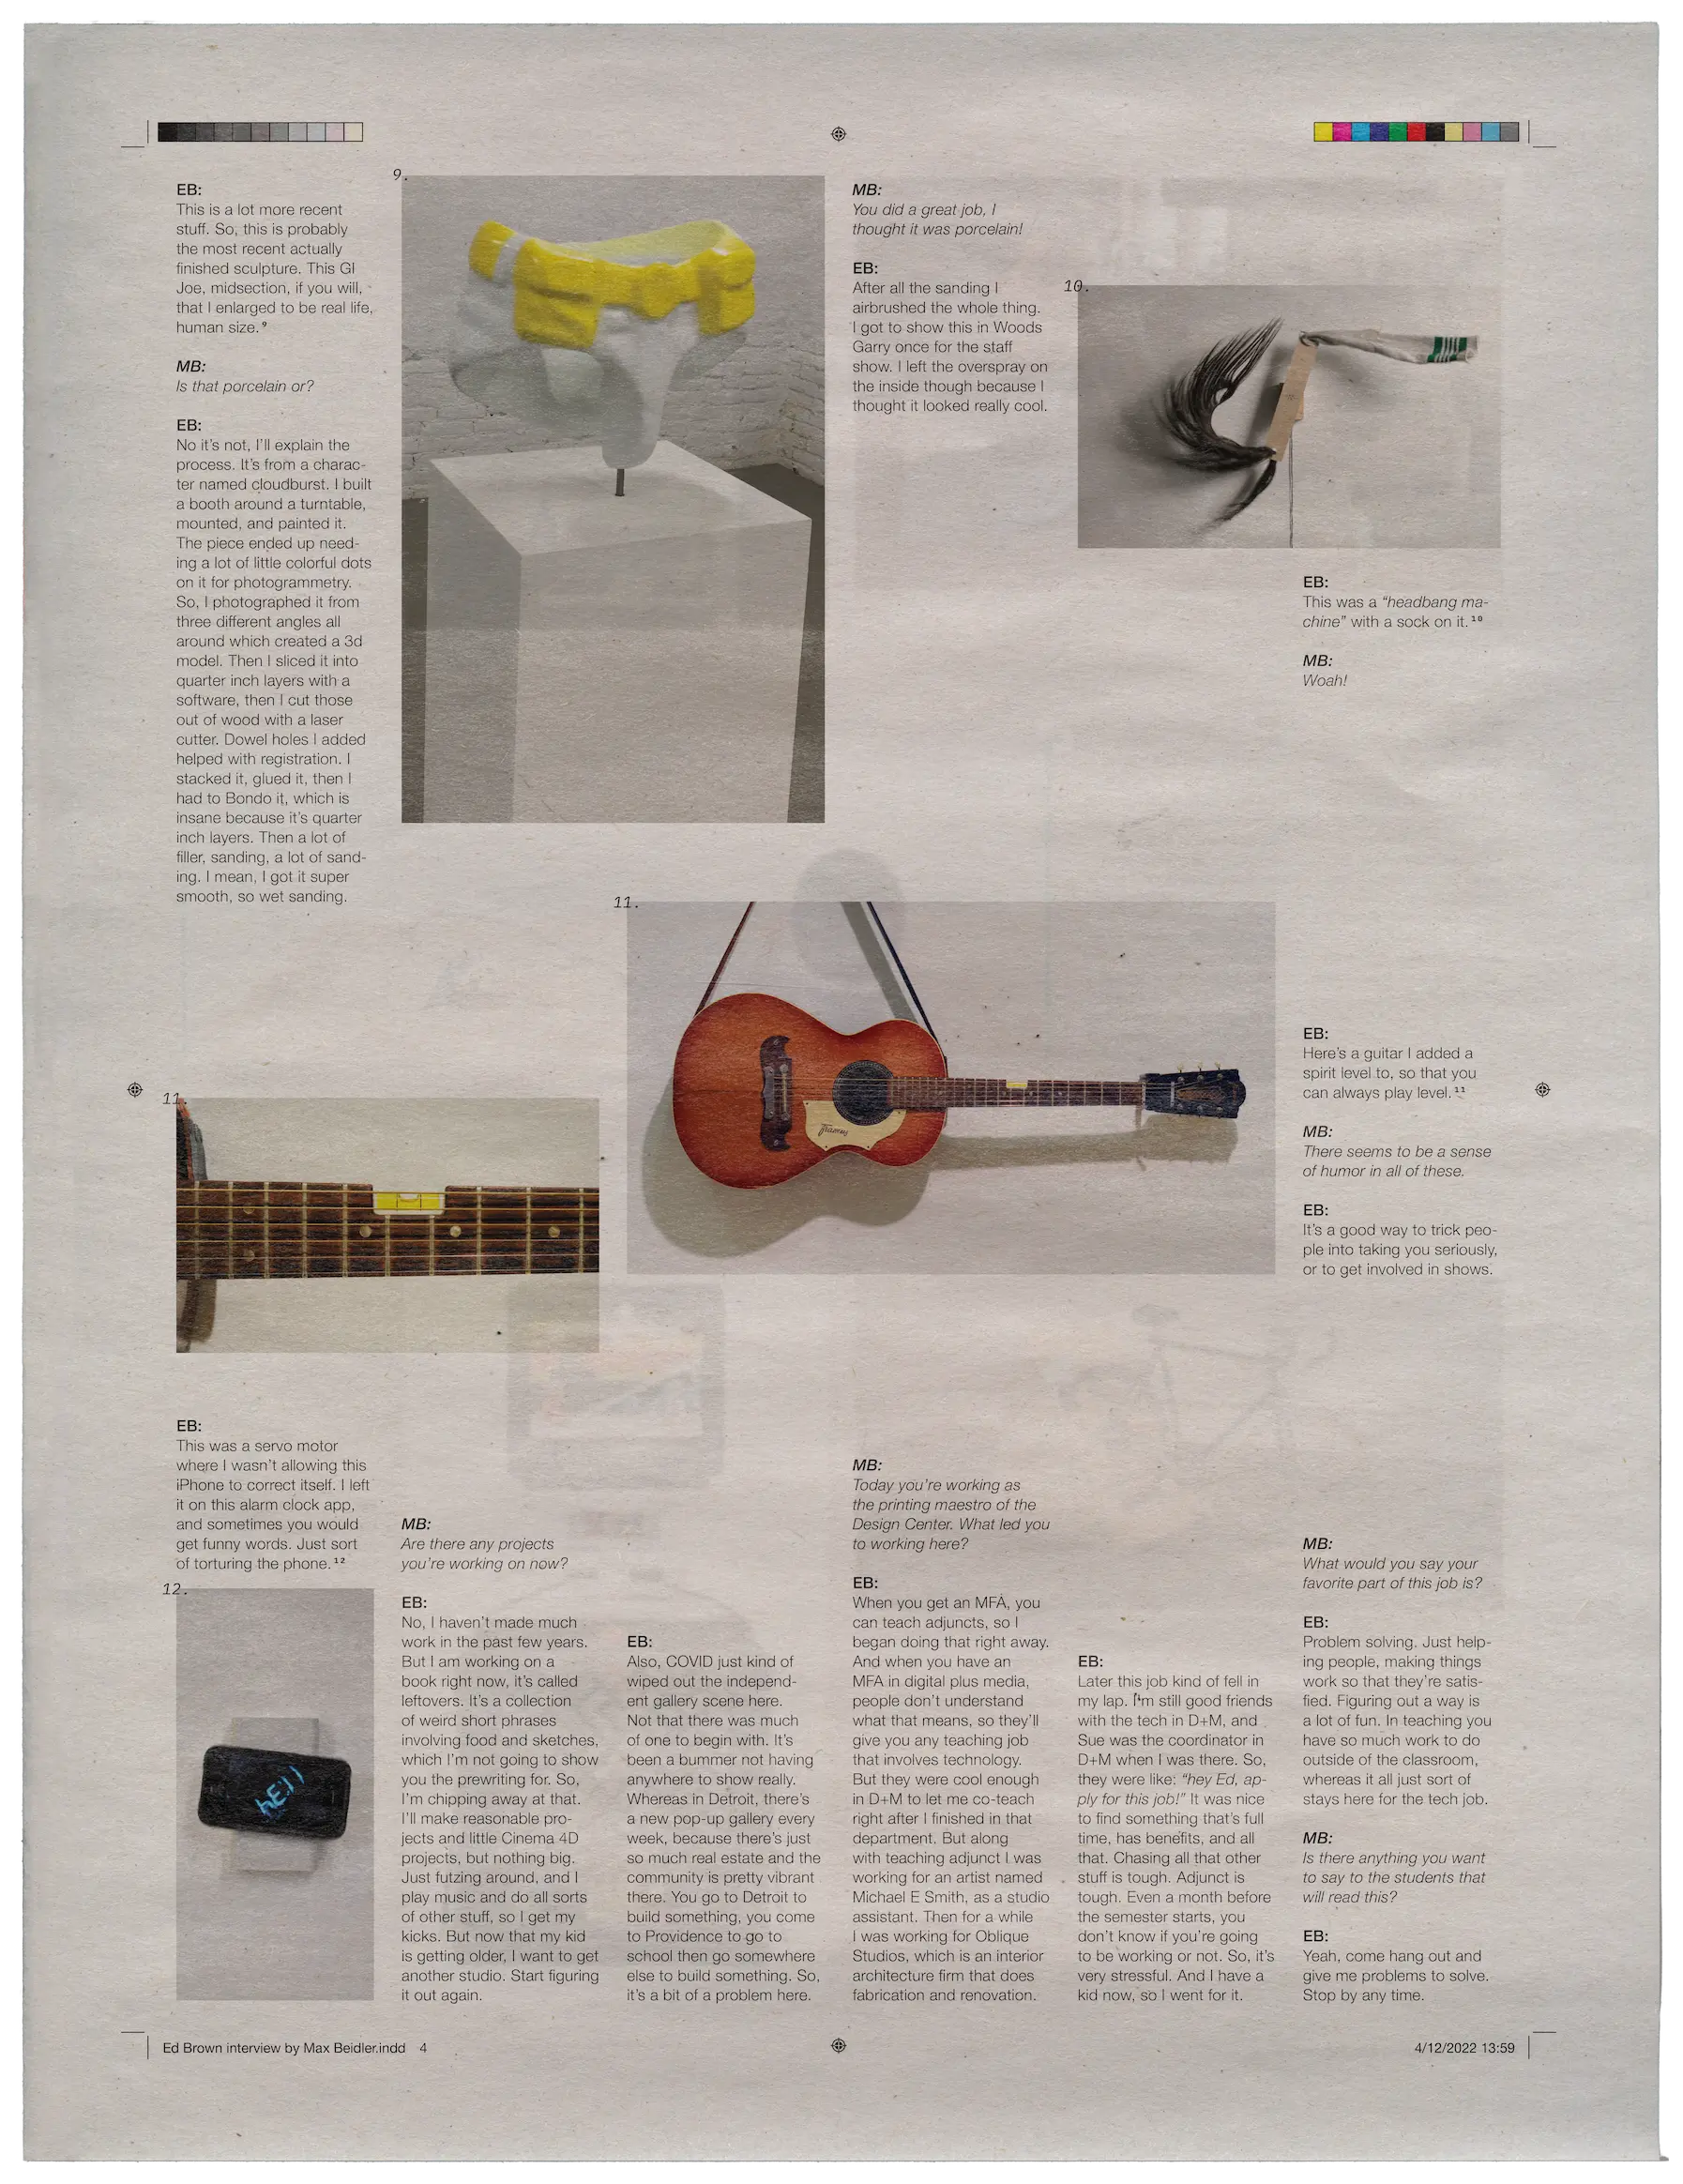 The back cover/page of the printed interview.